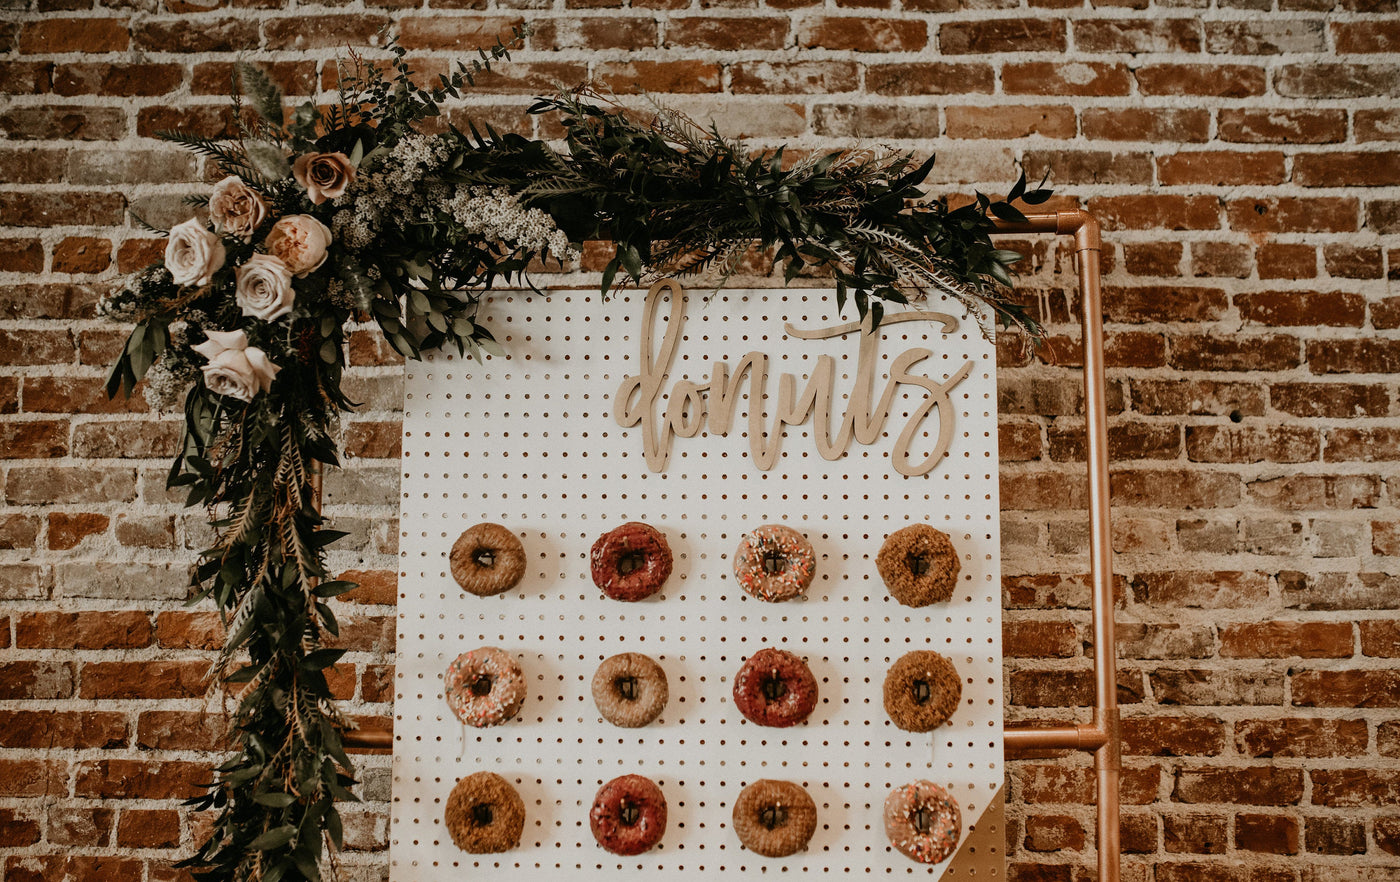 Donuts sign, Donuts wood sign, Donuts cutout for donut wall, donut wall decorations, donuts sign for wedding, donuts sign for party decor